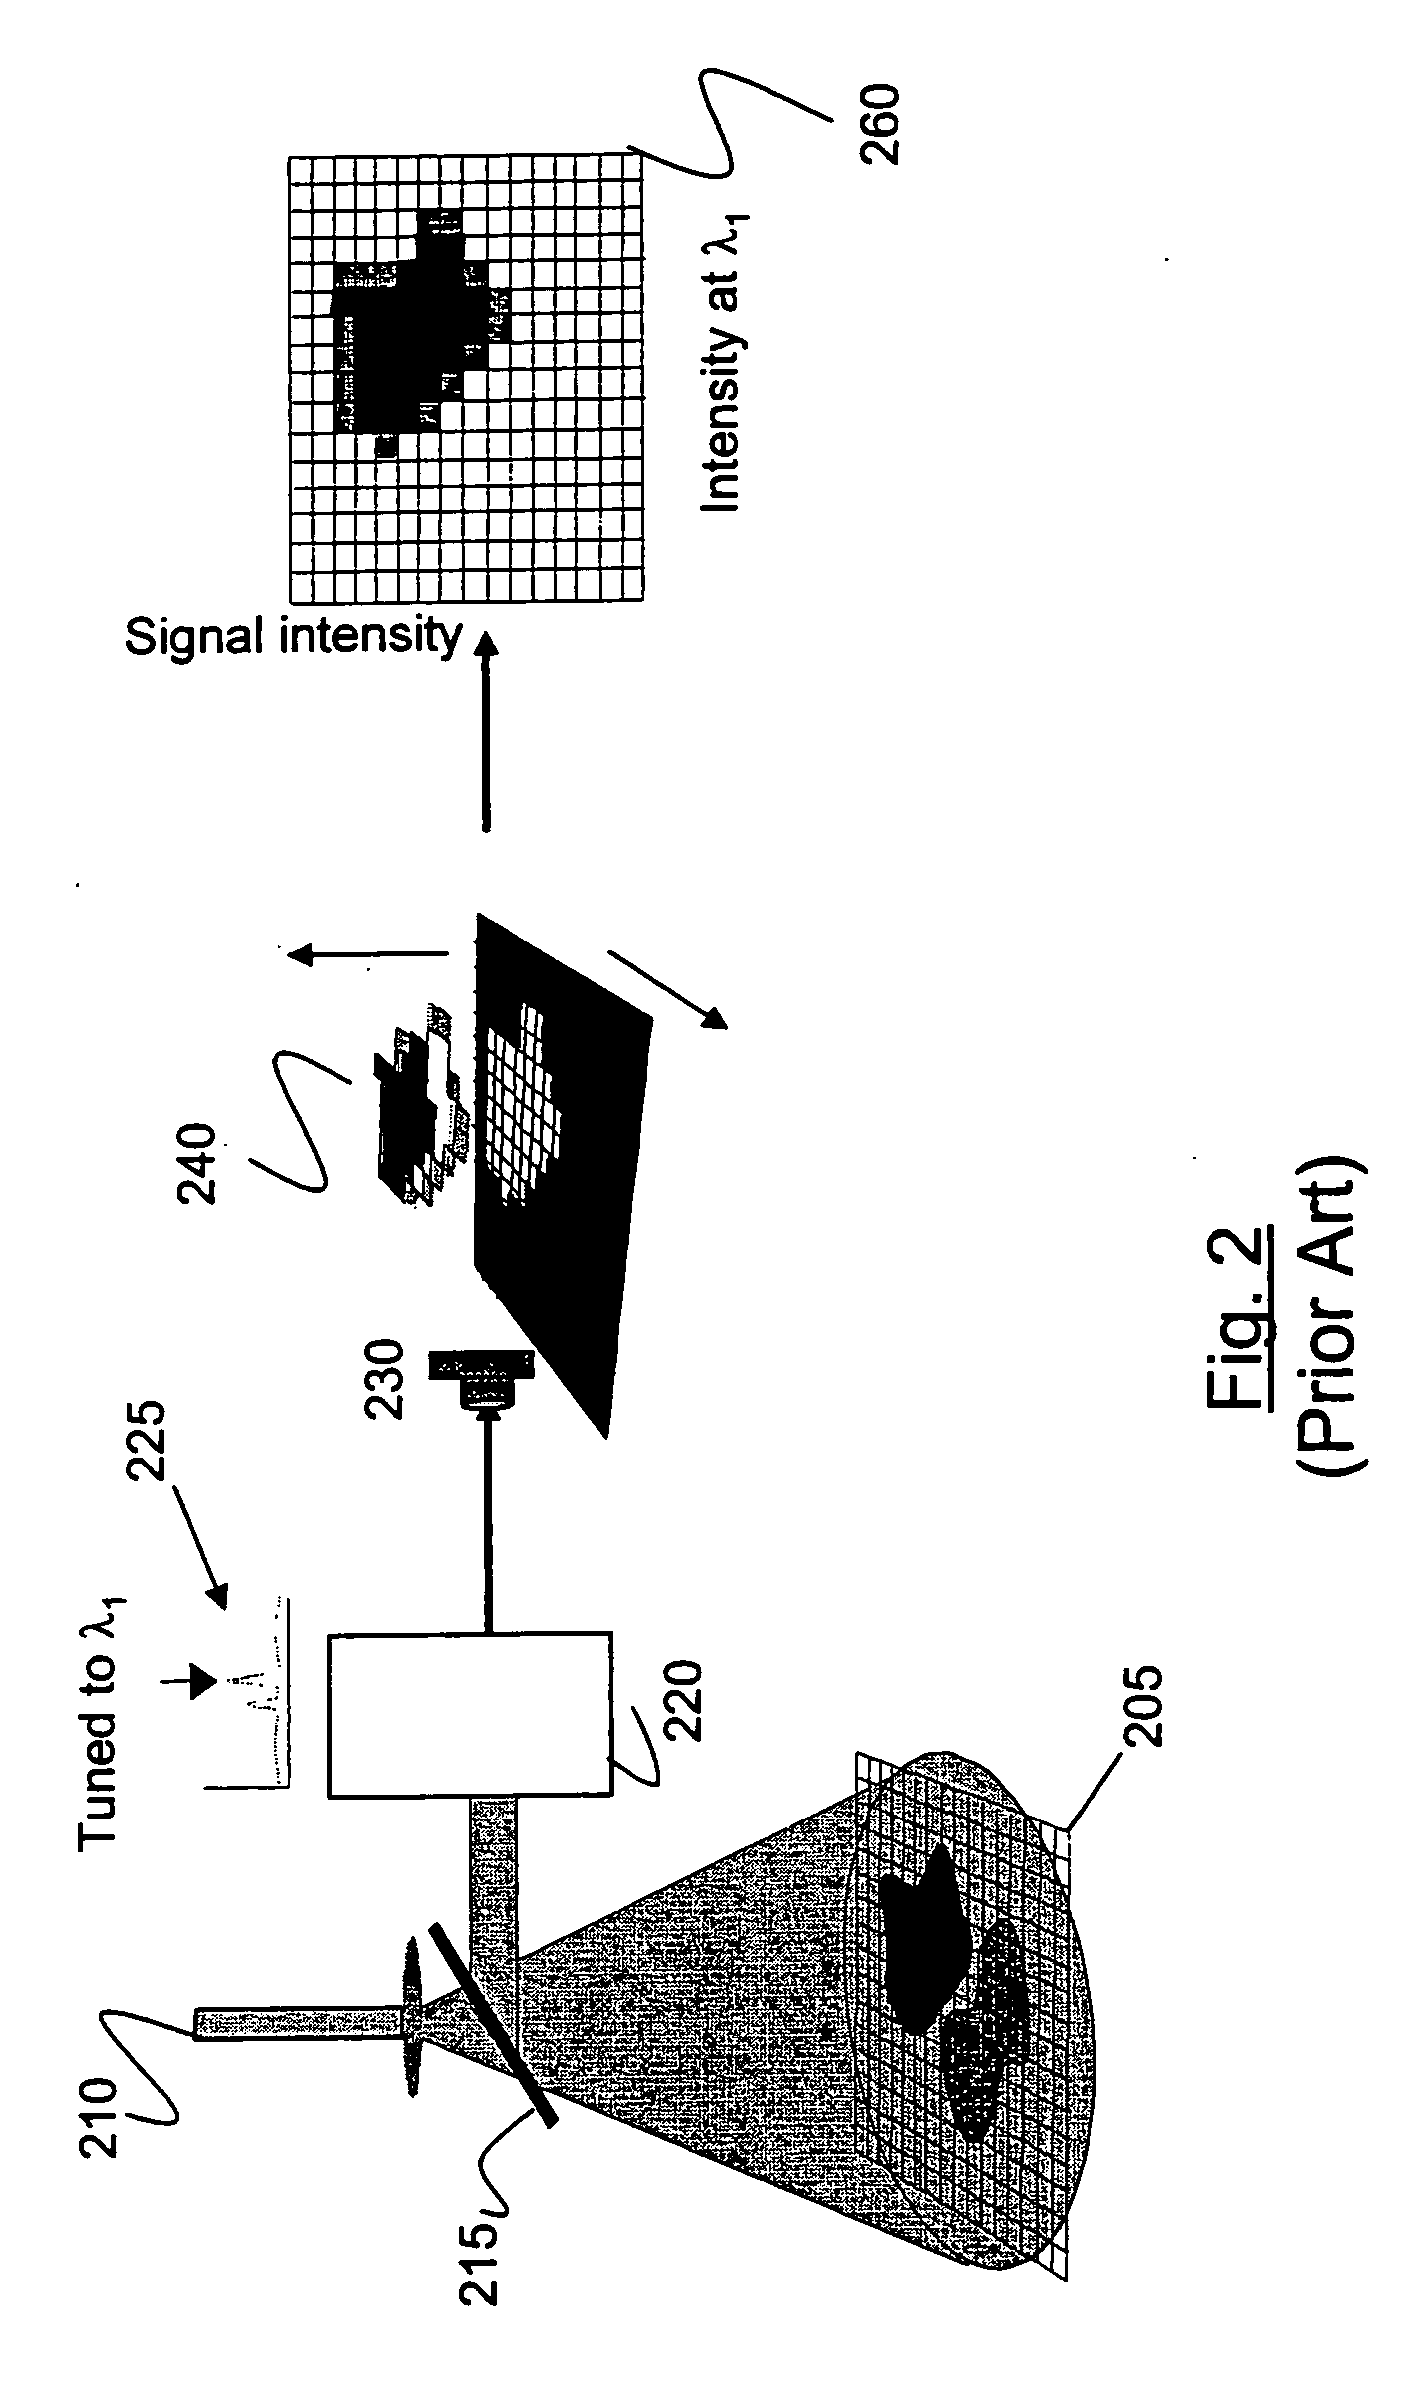 Method and apparatus for compact spectrometer for detecting hazardous agents